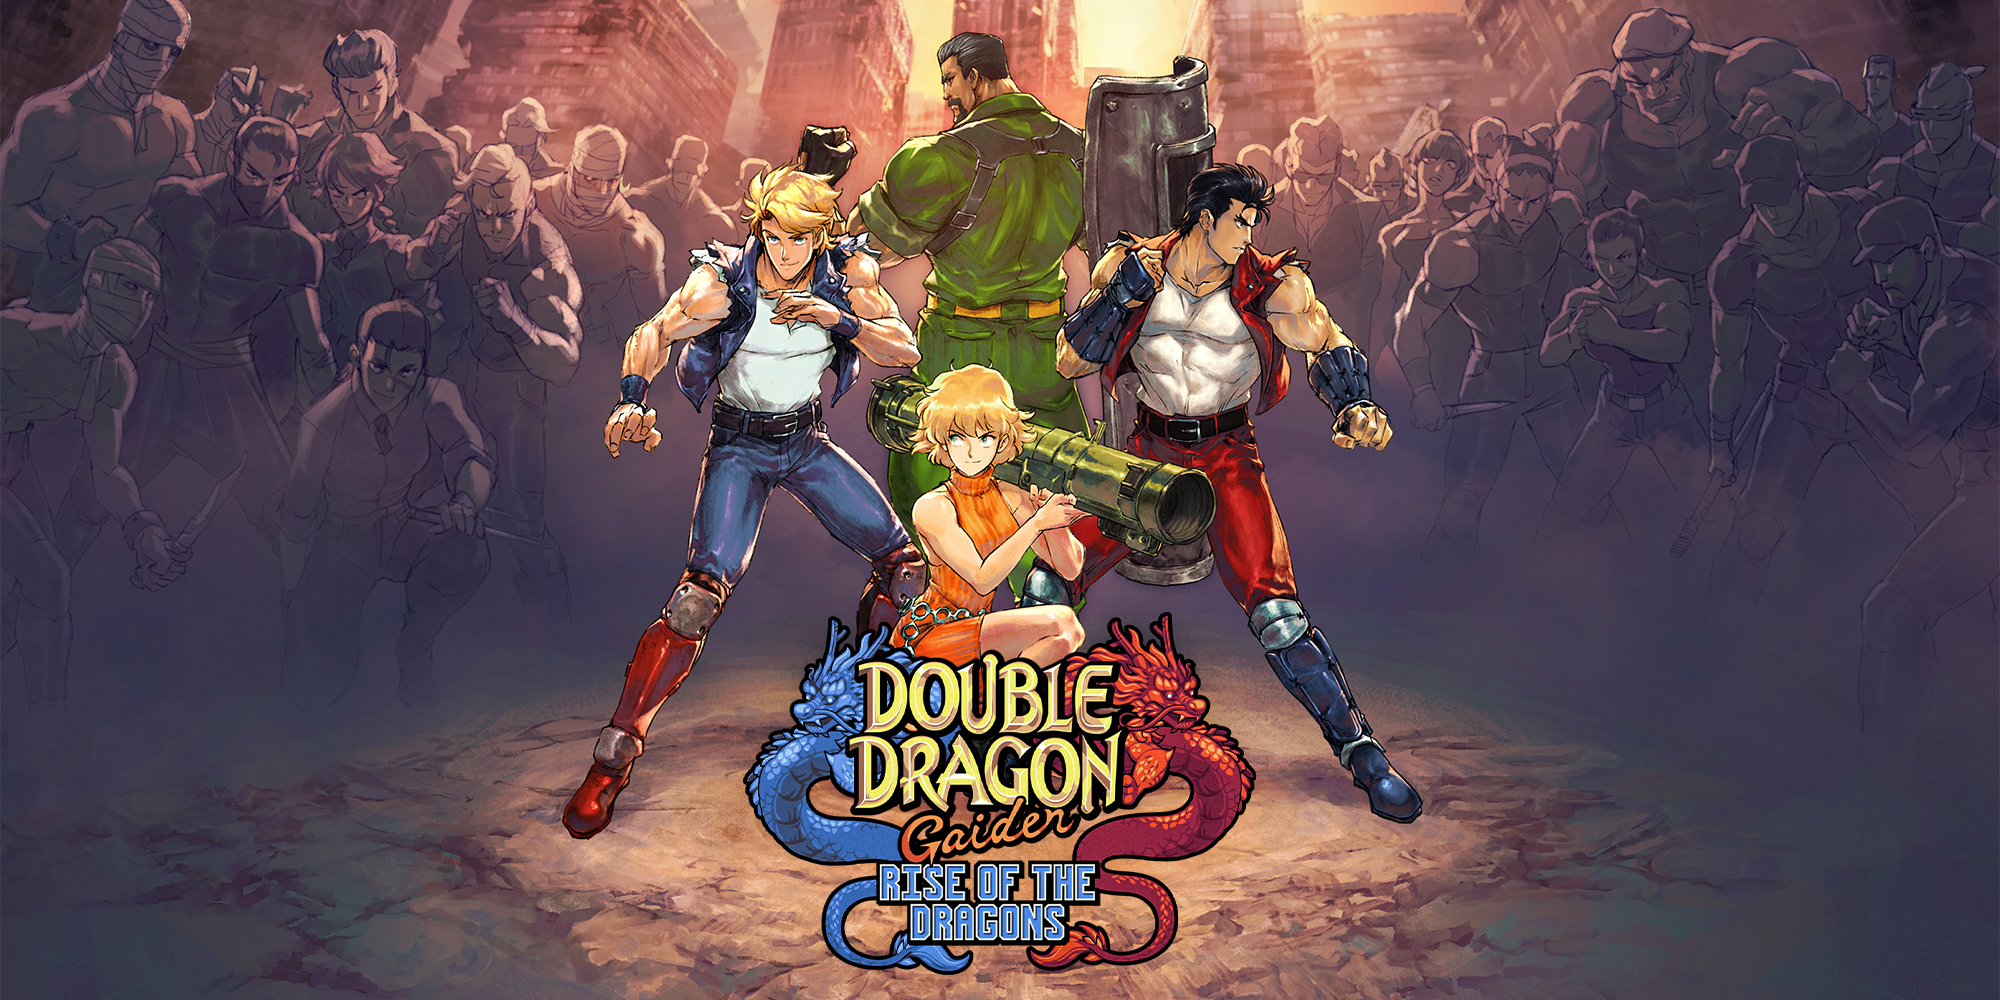 Double_Dragon_Gaiden_Rise_of_the_Dragons_afbeelding